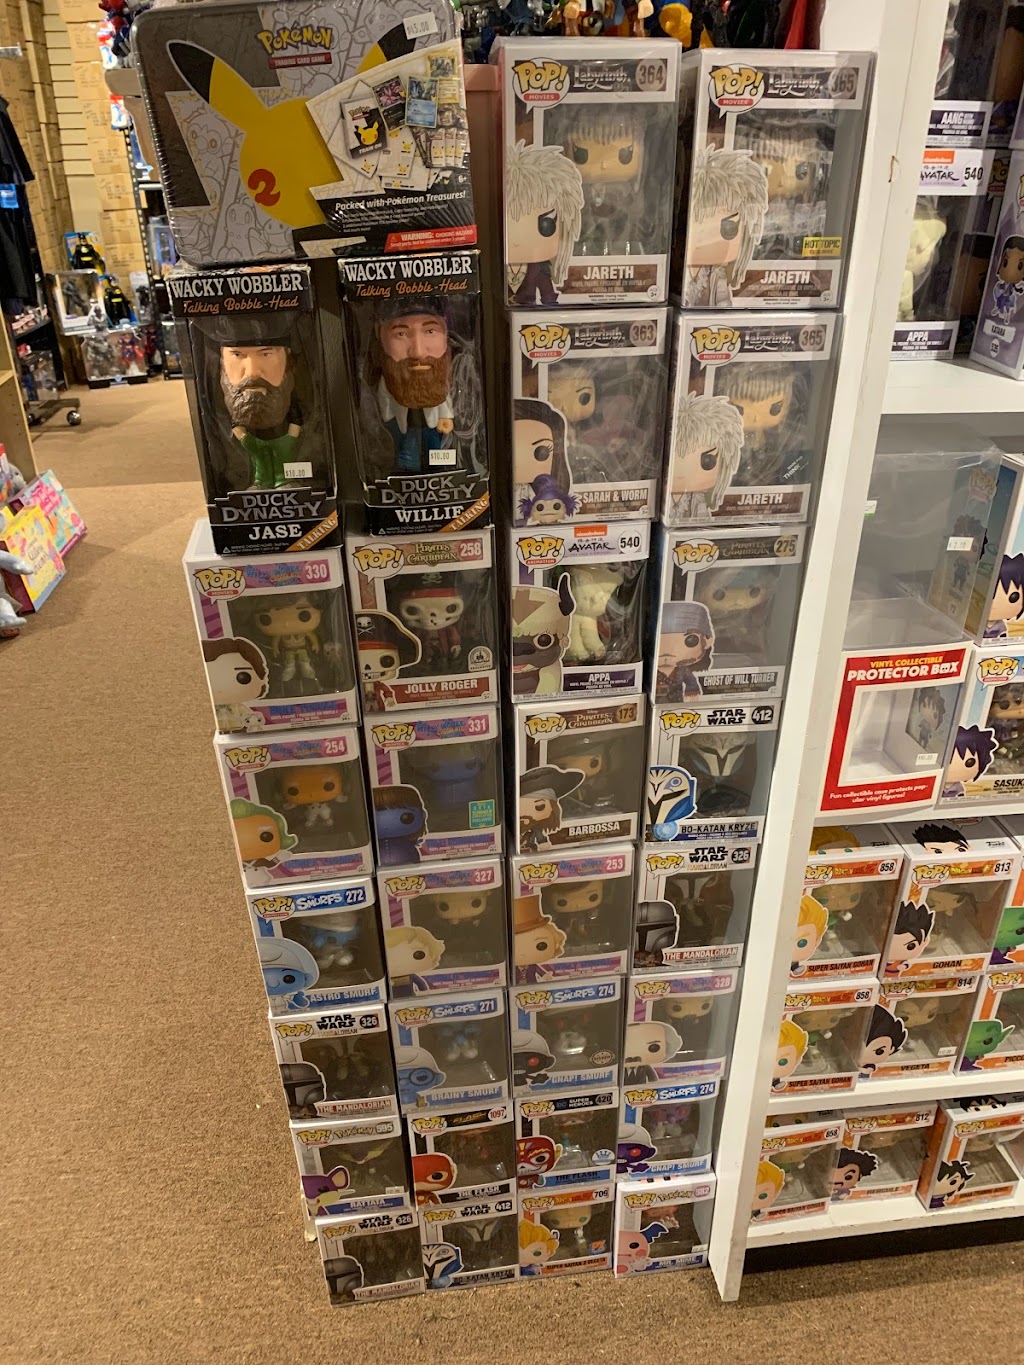 Pops Toys and Collectibles | 310 Gentry St, Spring, TX 77373, USA | Phone: (713) 248-6059